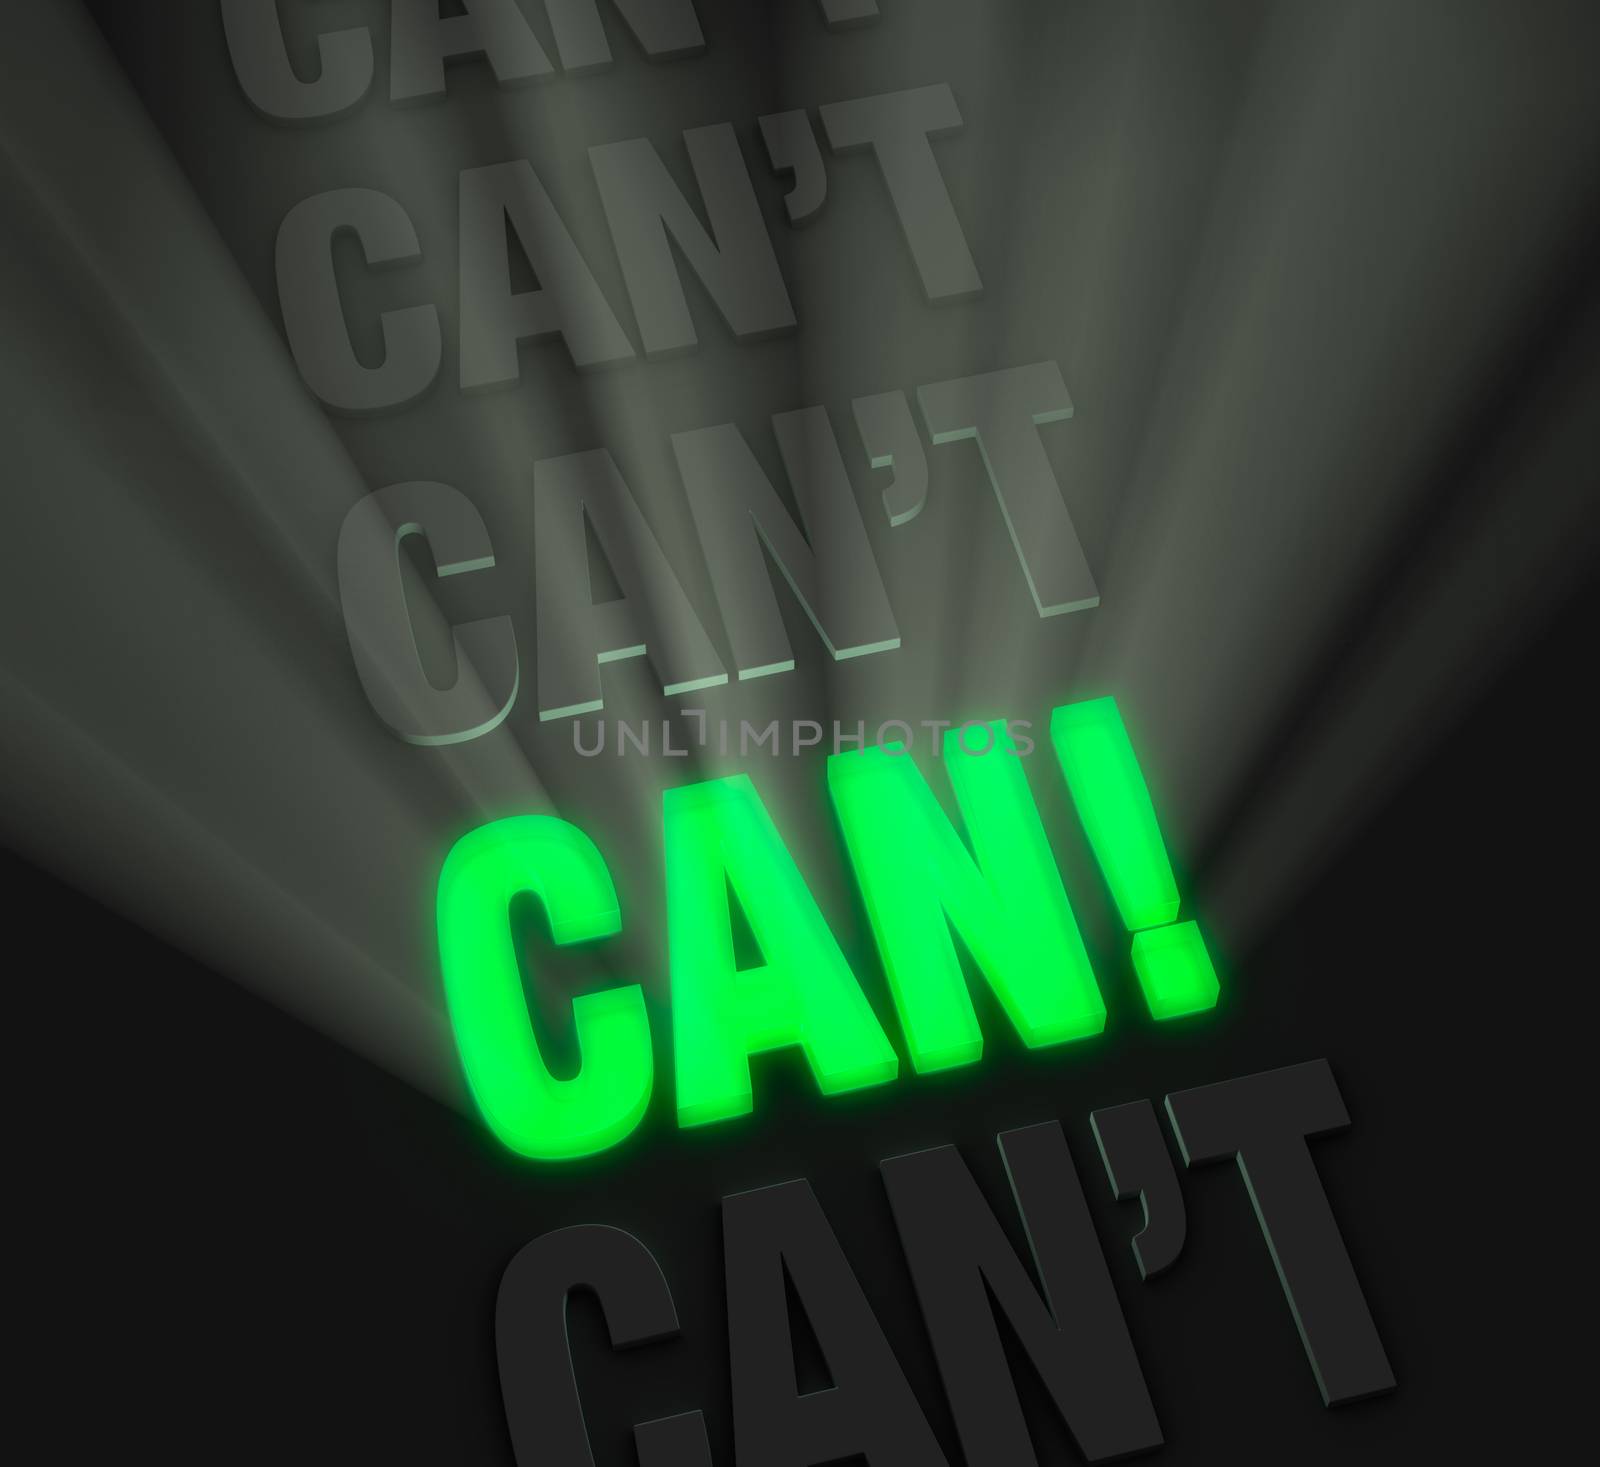 Light rays burst from a bright, green "CAN!" in a row of "CAN'T"s on a dark background.